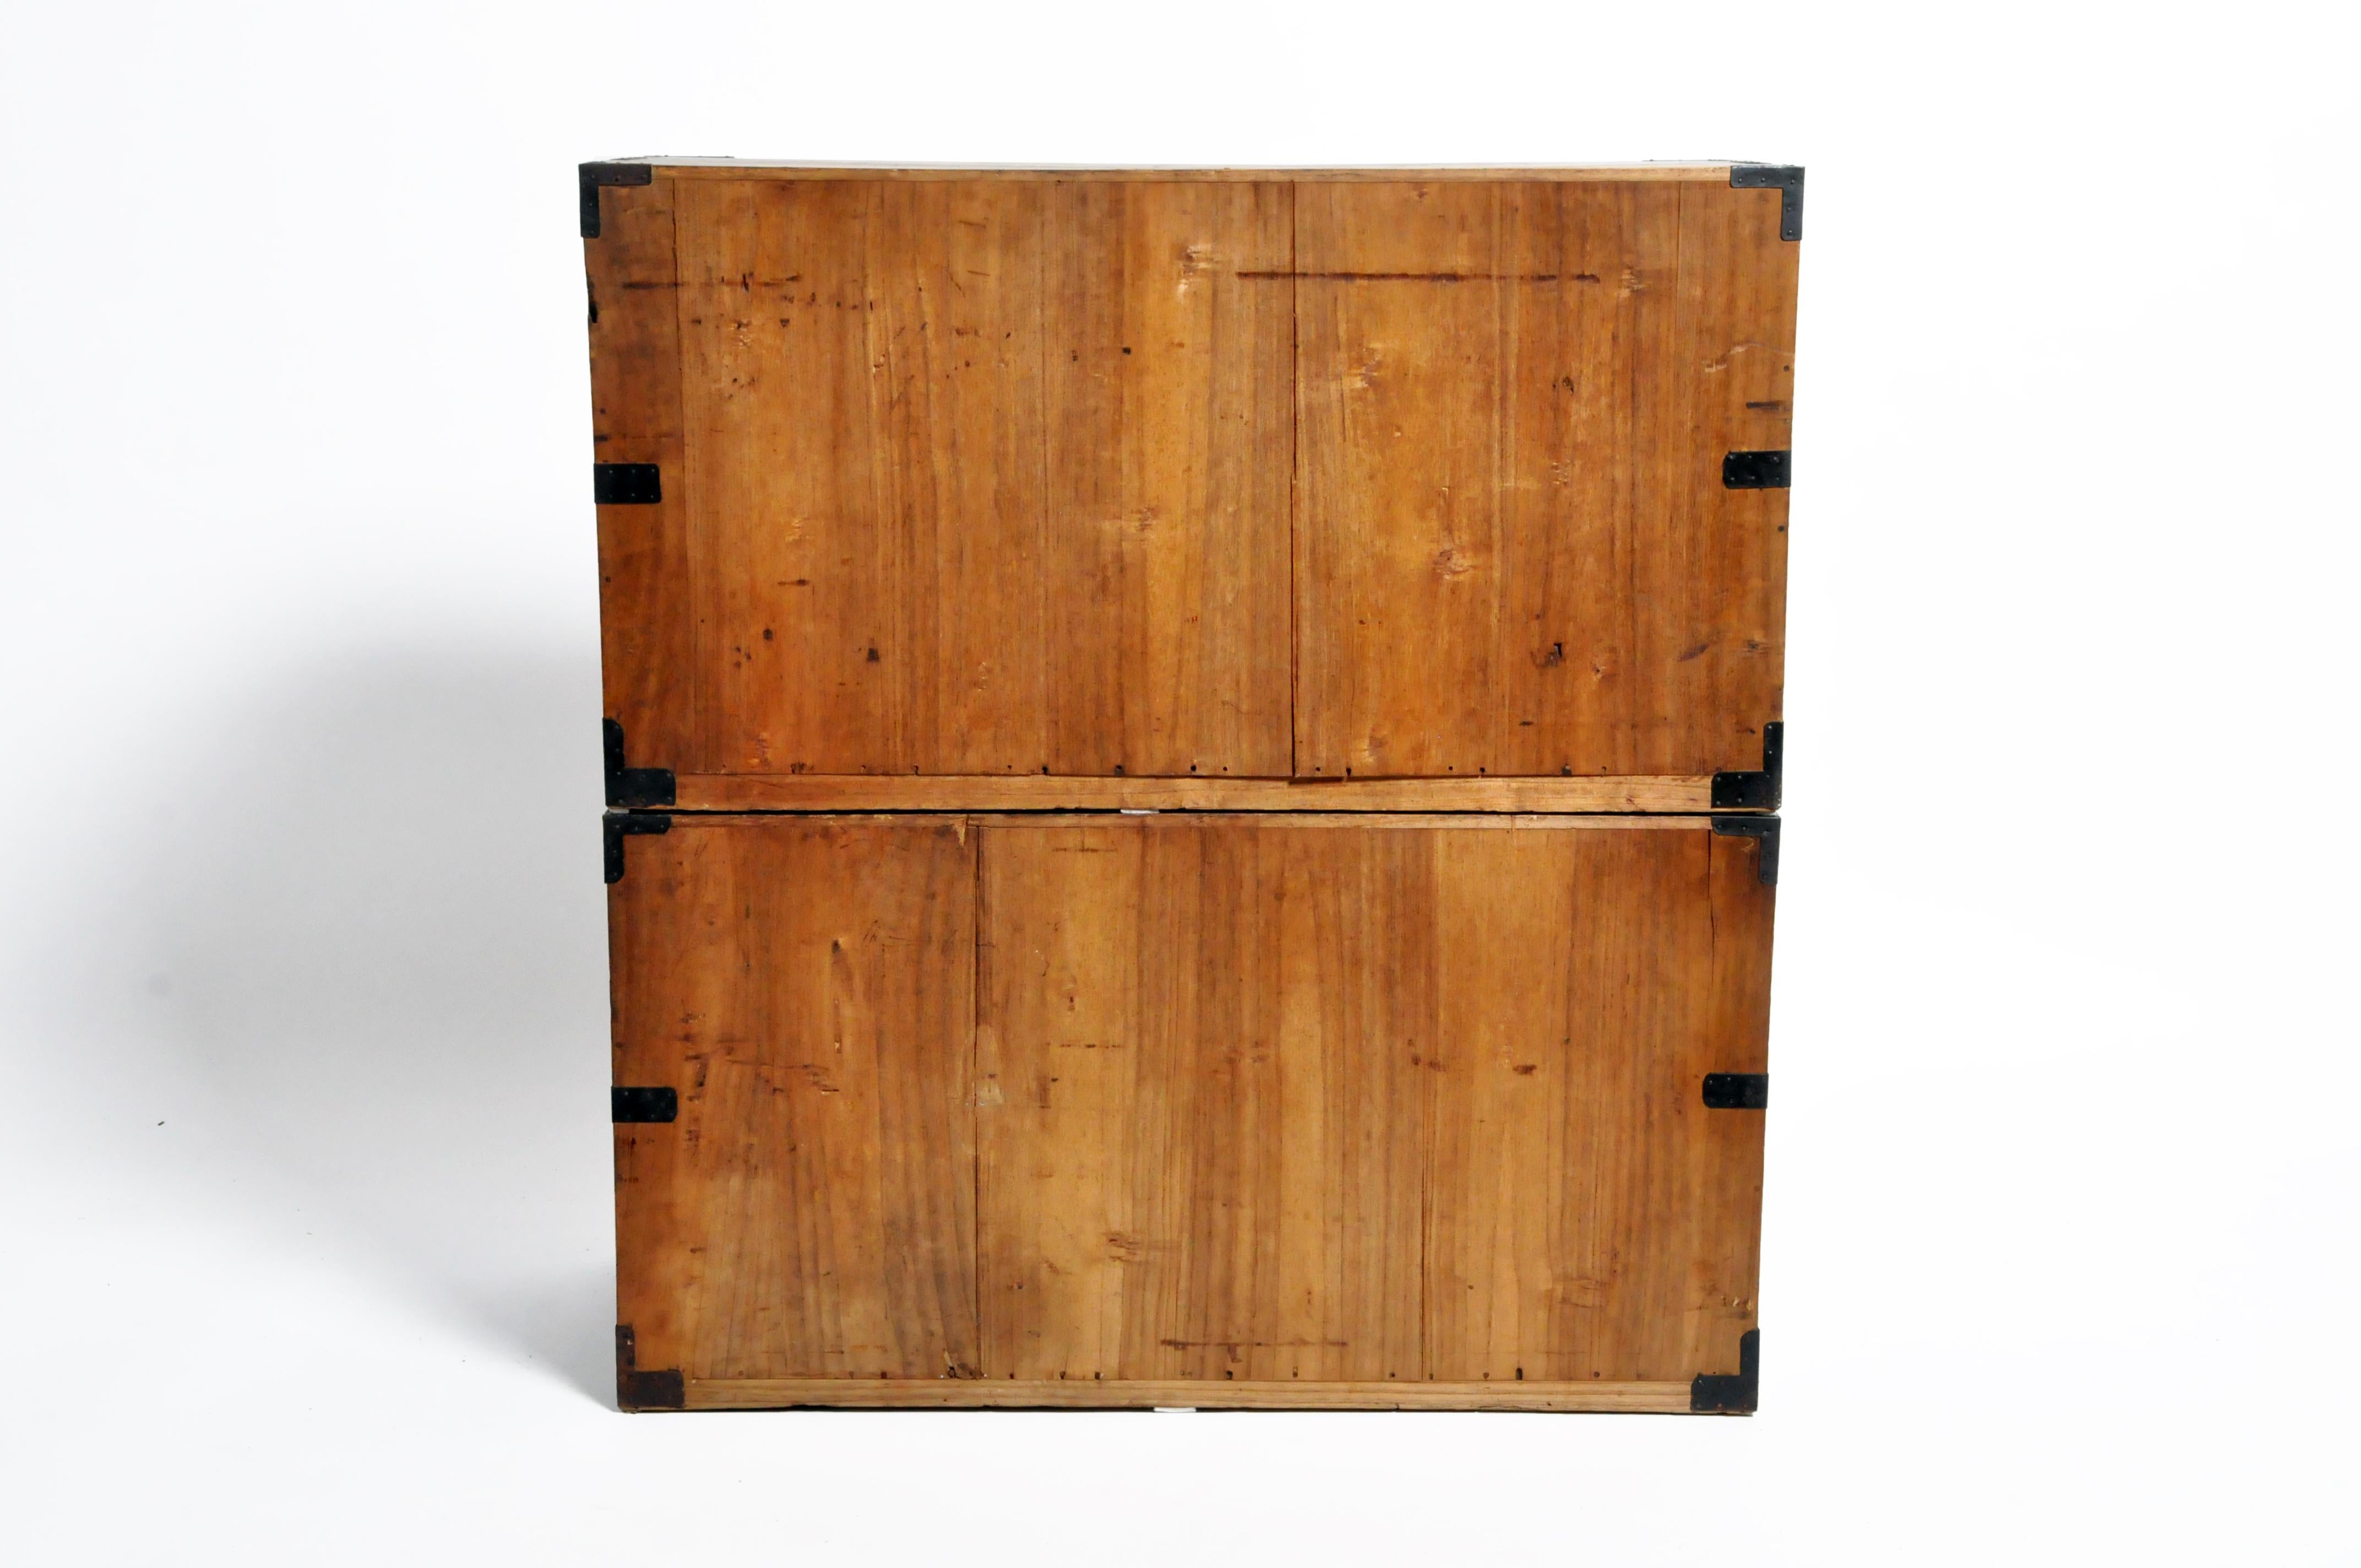 This two-part Tansu chest is from Japan and was made from pine wood, circa 1900. The piece features 4 drawers total and can either be stacked on top on one another or separated and used as a nightstand or side table. Wear consistent with age and use.